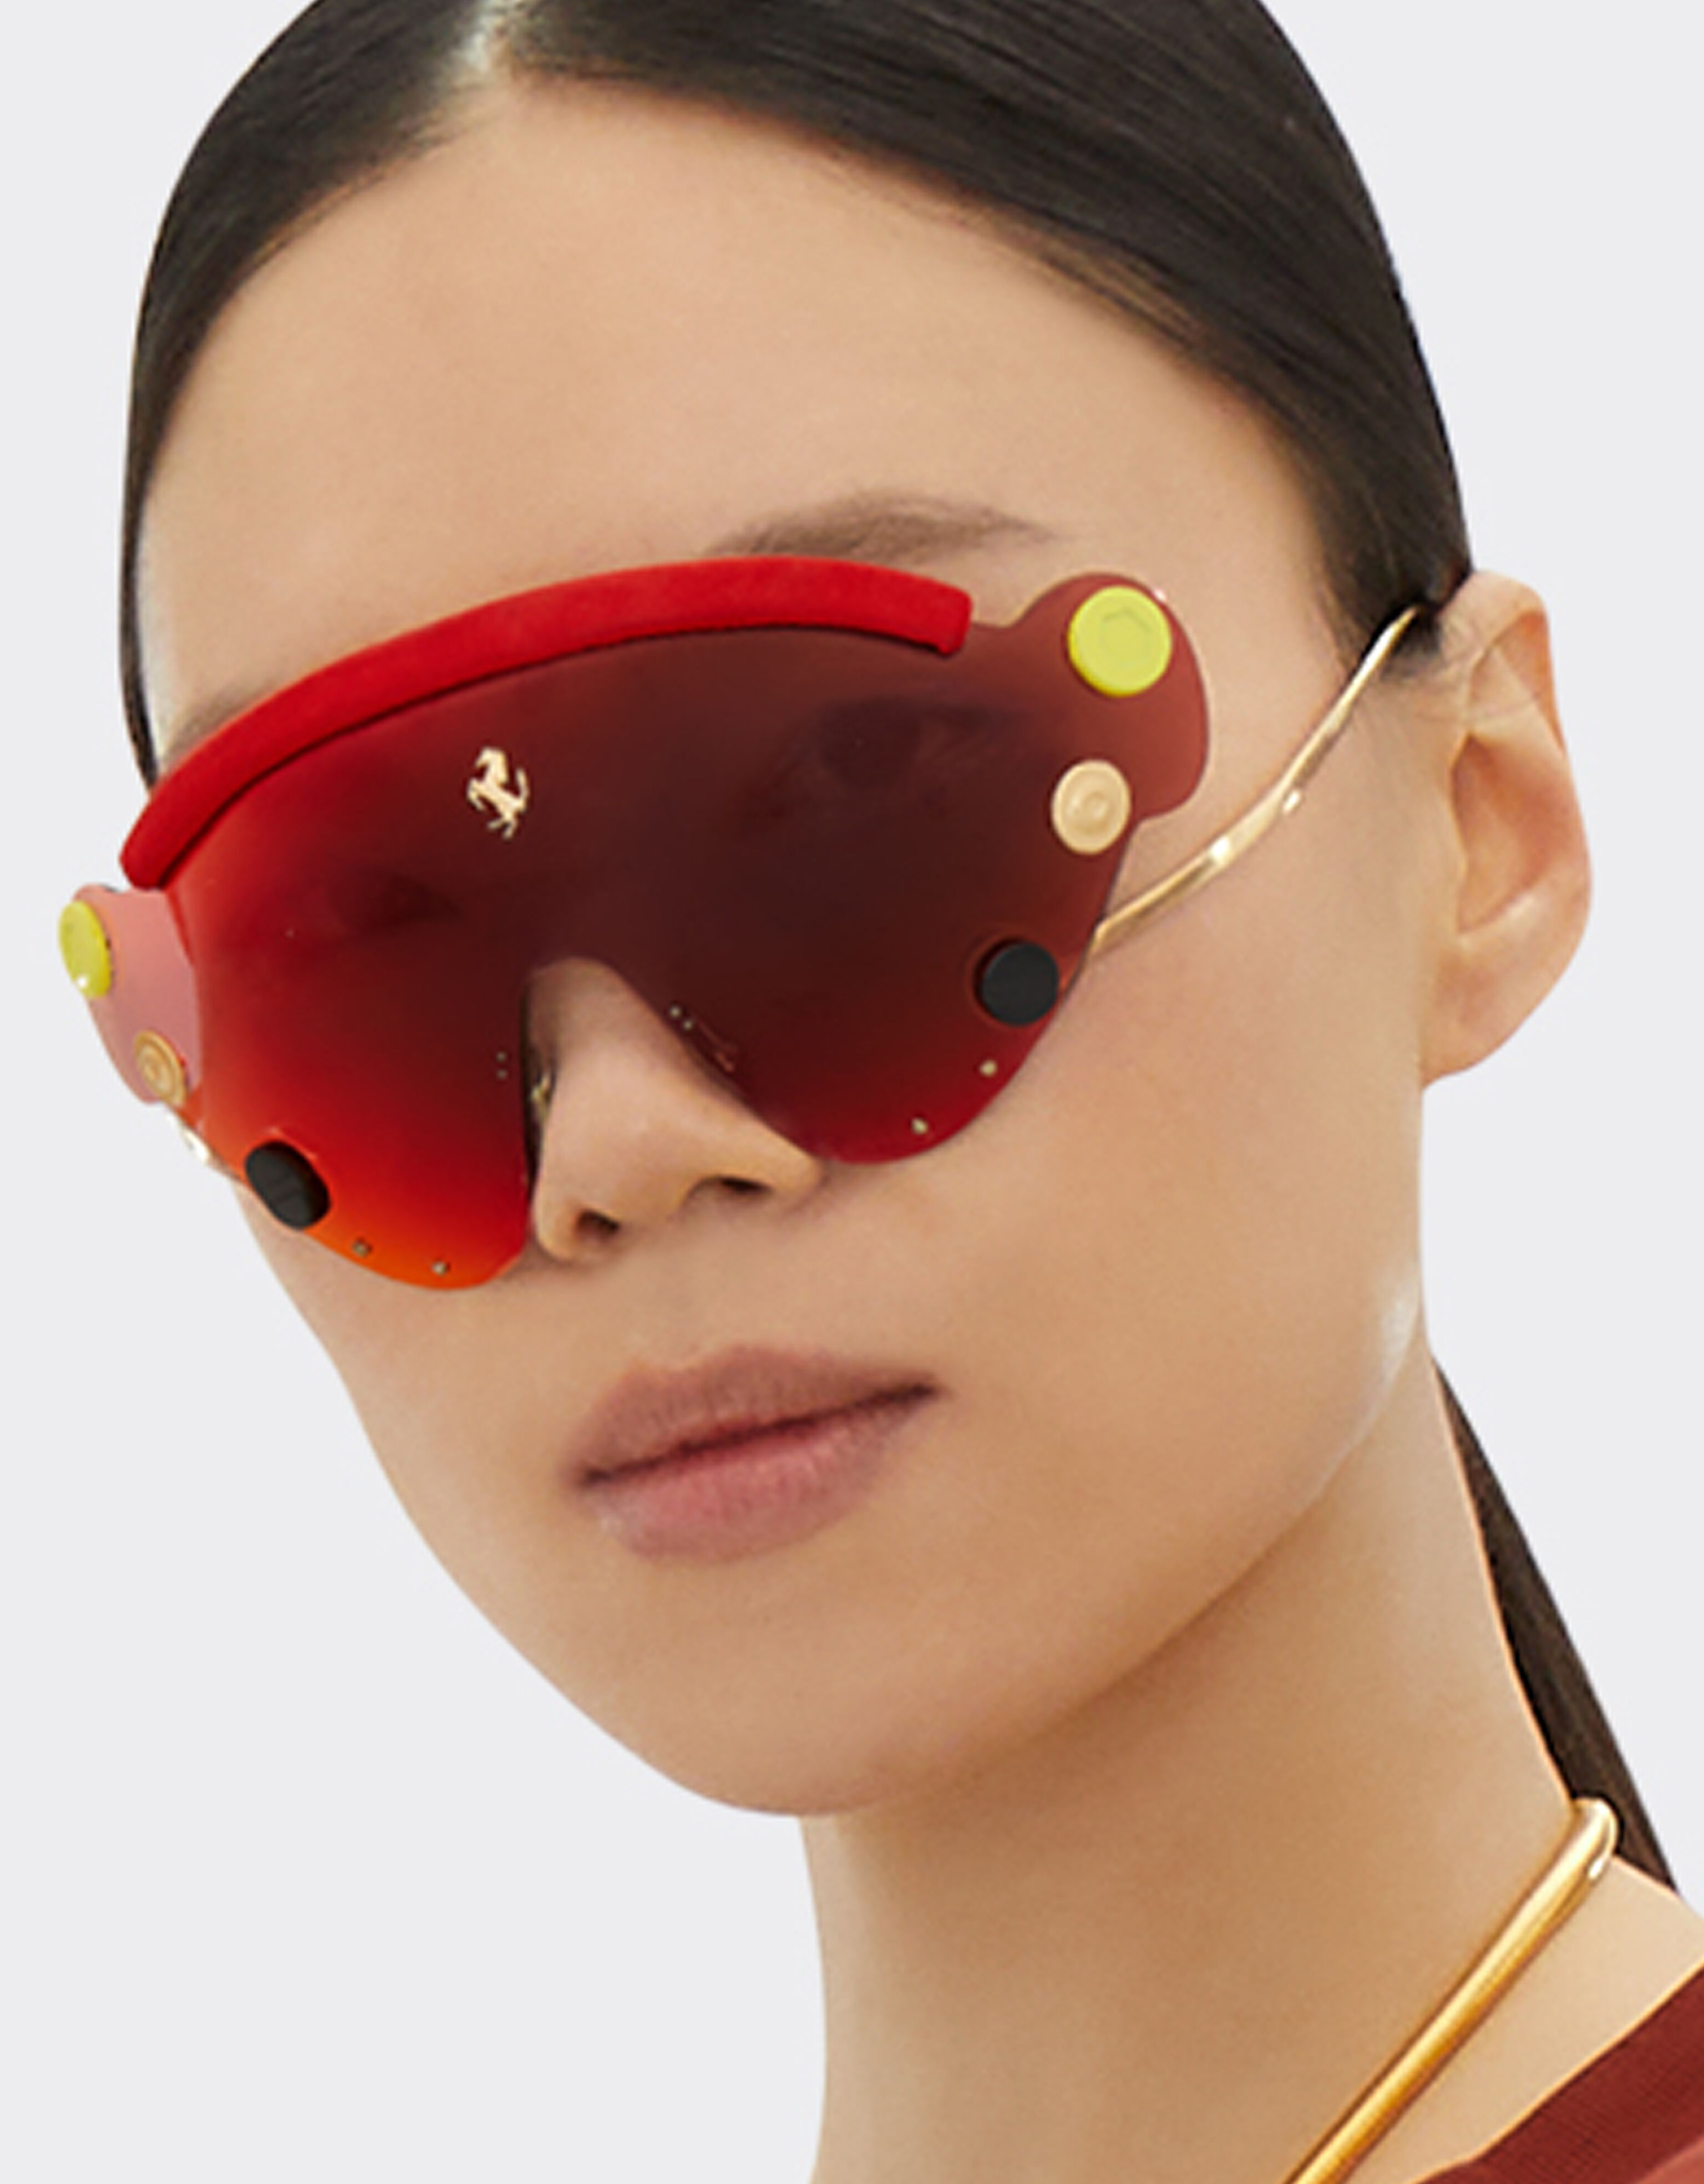 Ferrari Limited Edition Ferrari sunglasses in red and gold-tone metal with red mirror shield Red F1243f